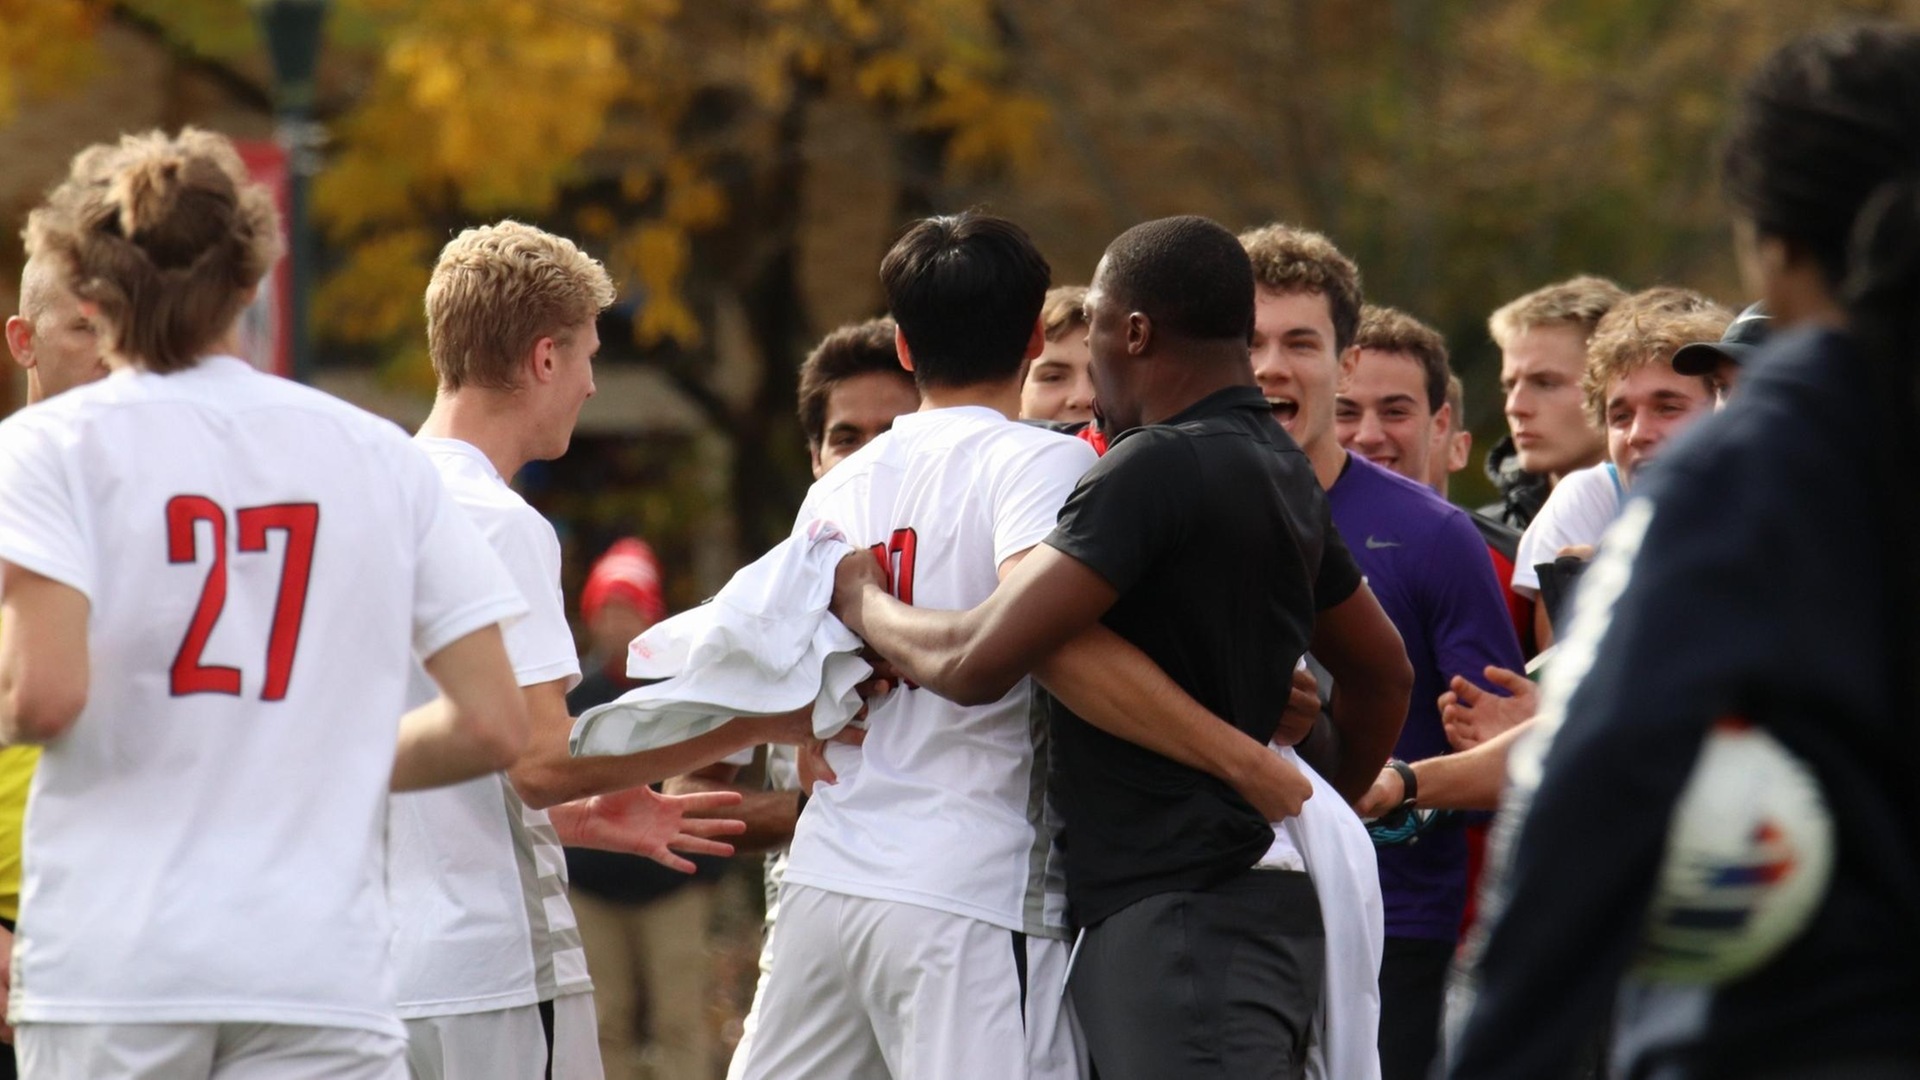 group of men's soccer players celebrating after a goal